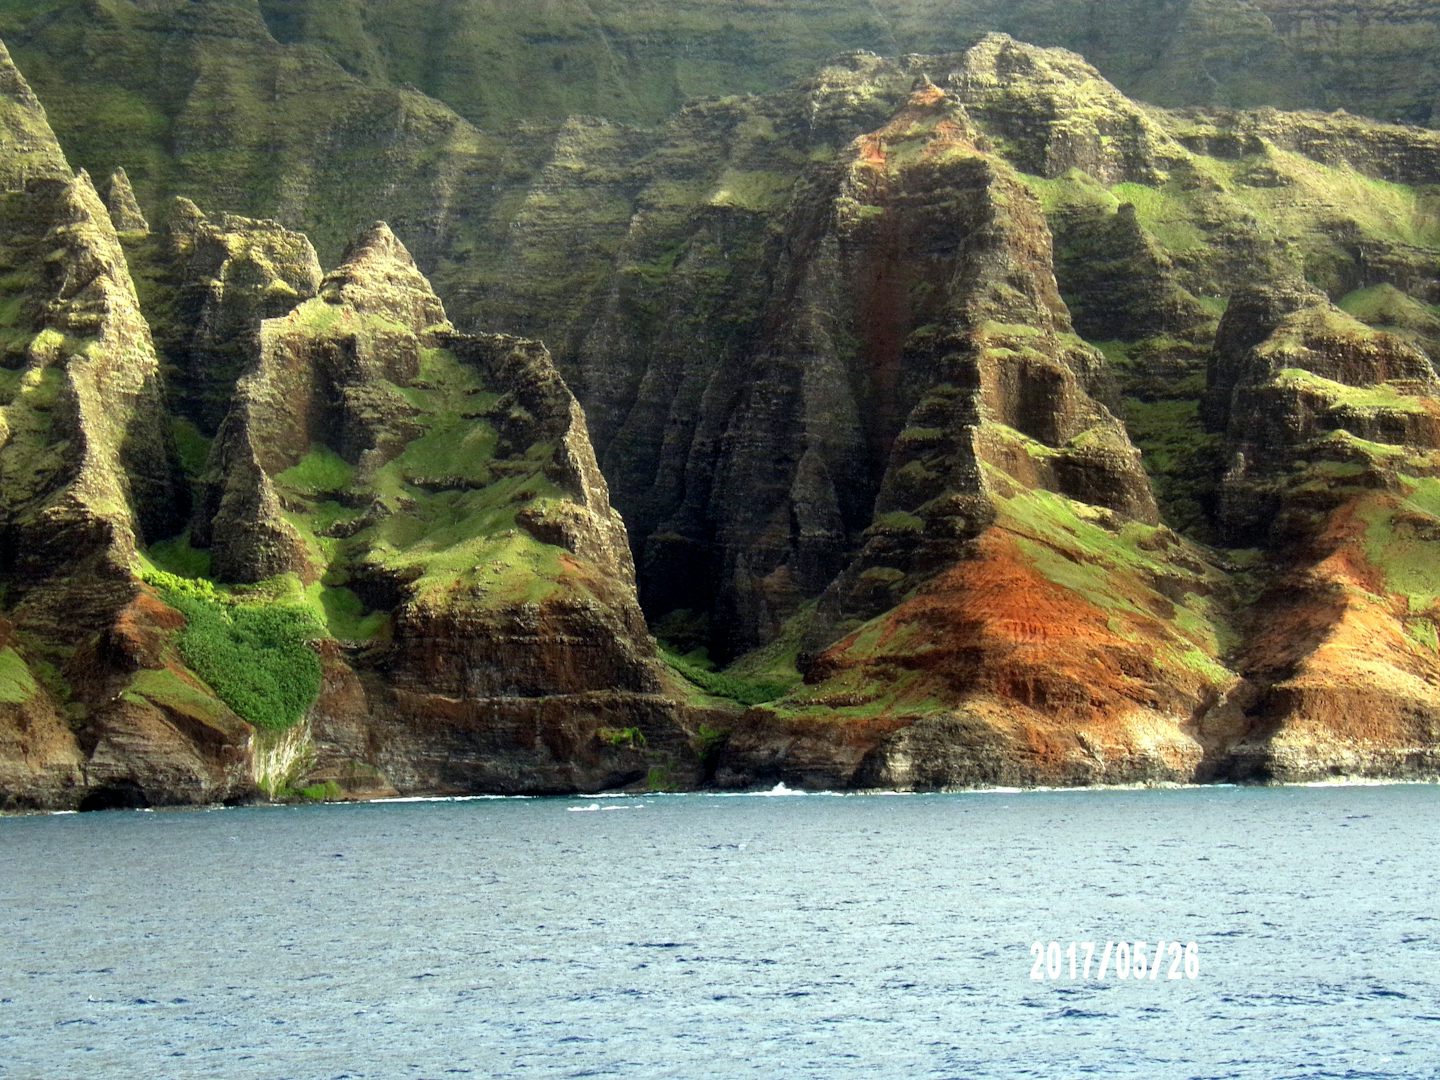 Our balcony  from the  Pride of America view as we sailed the past the Napoli Coast of Kauai.